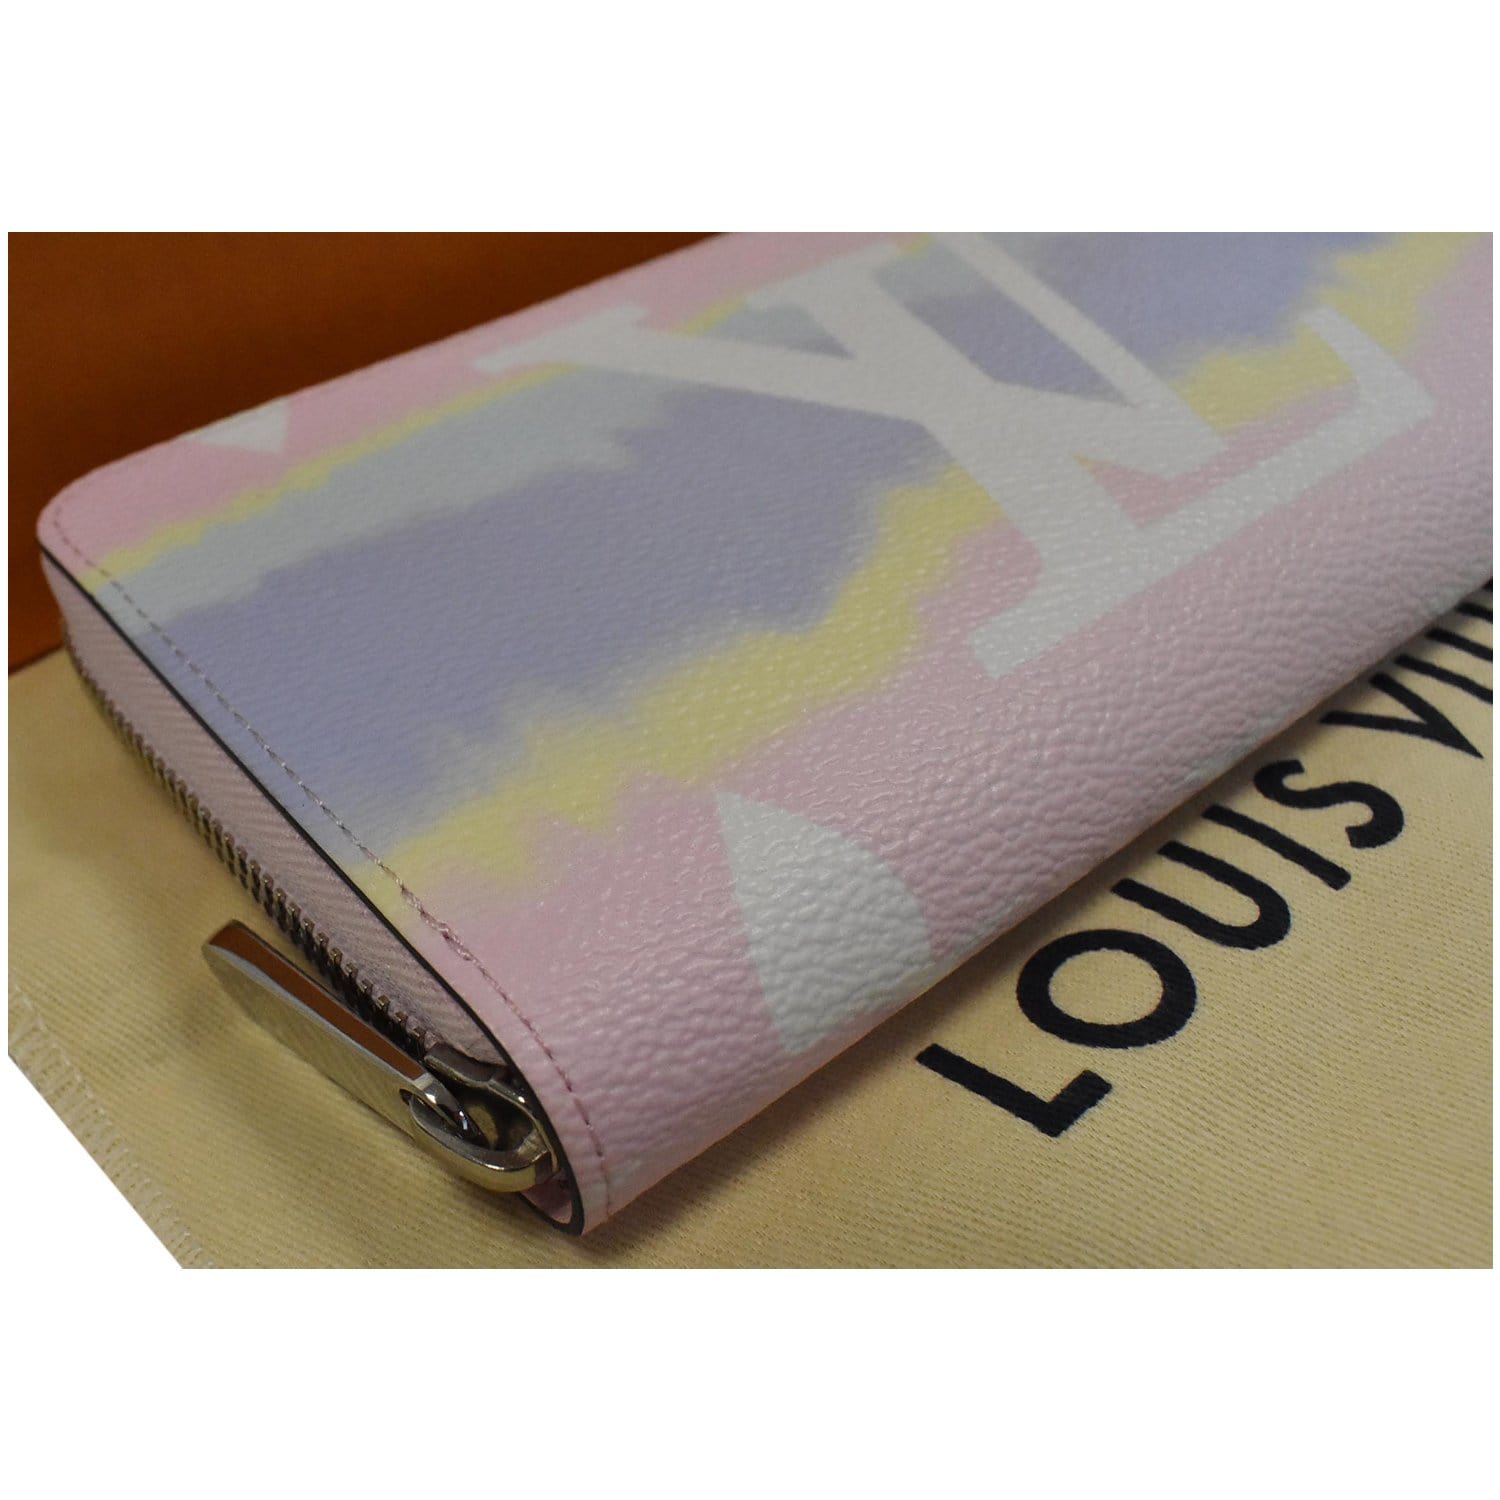 Louis Vuitton Zippy Wallet LV Escale Pastel in Coated Canvas with